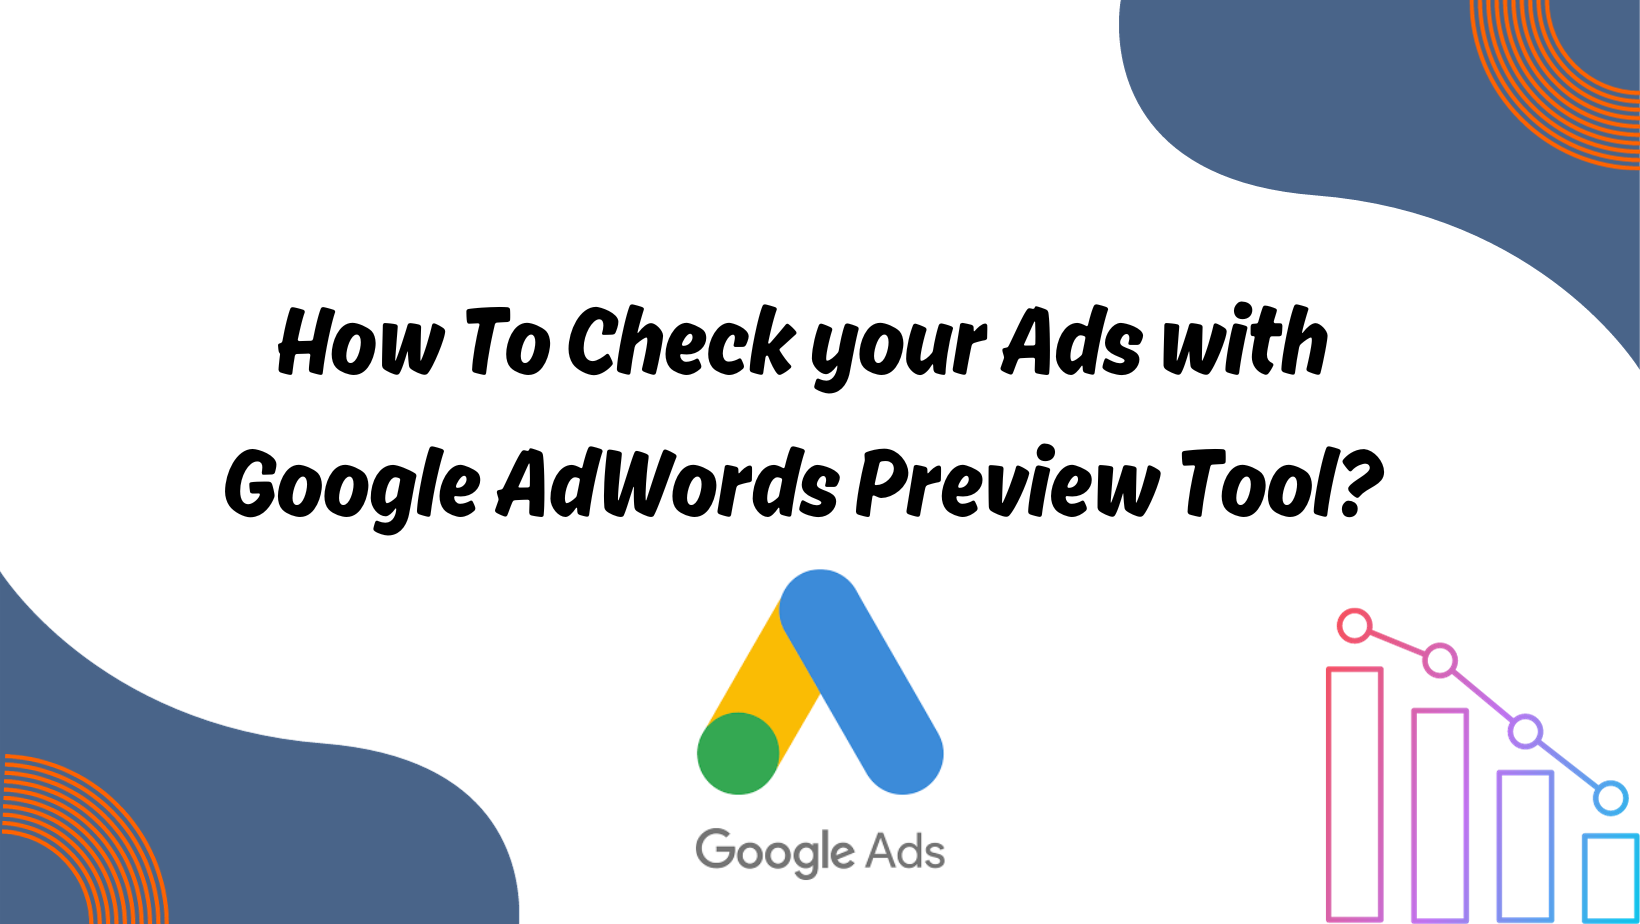 How To Check your Ads with Google AdWords Preview Tool